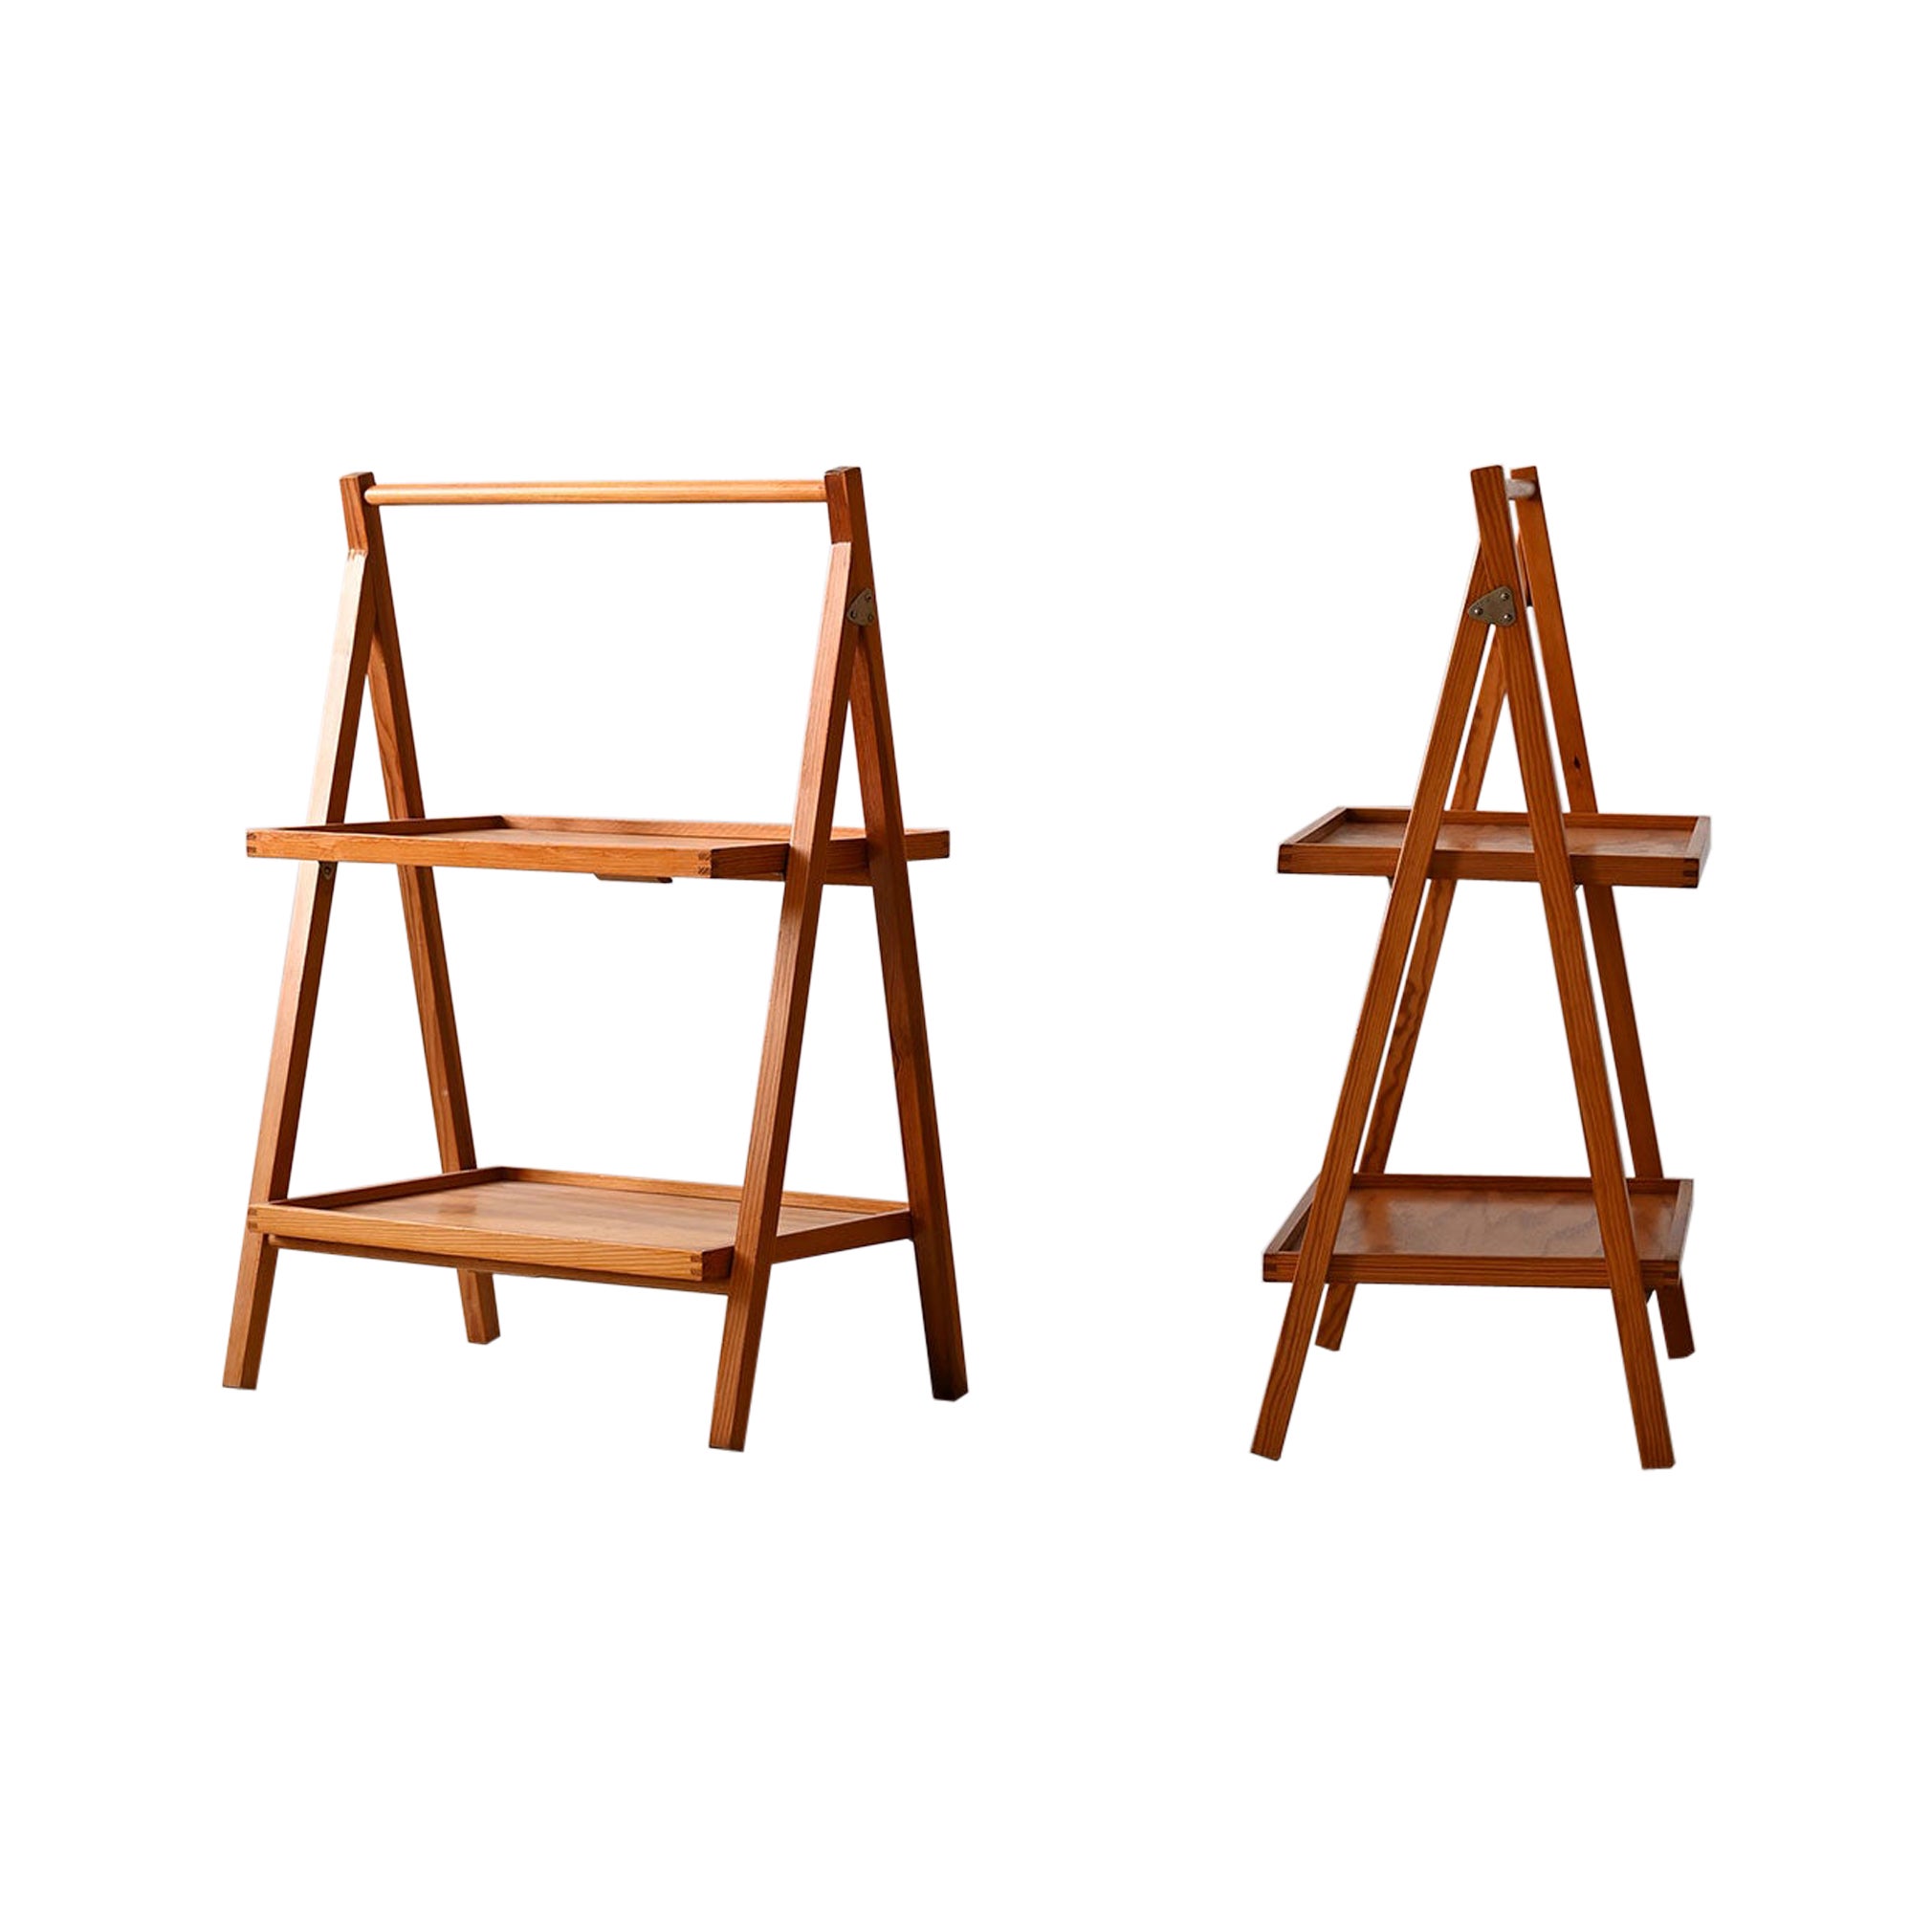 Pair of folding side tables with two shelves